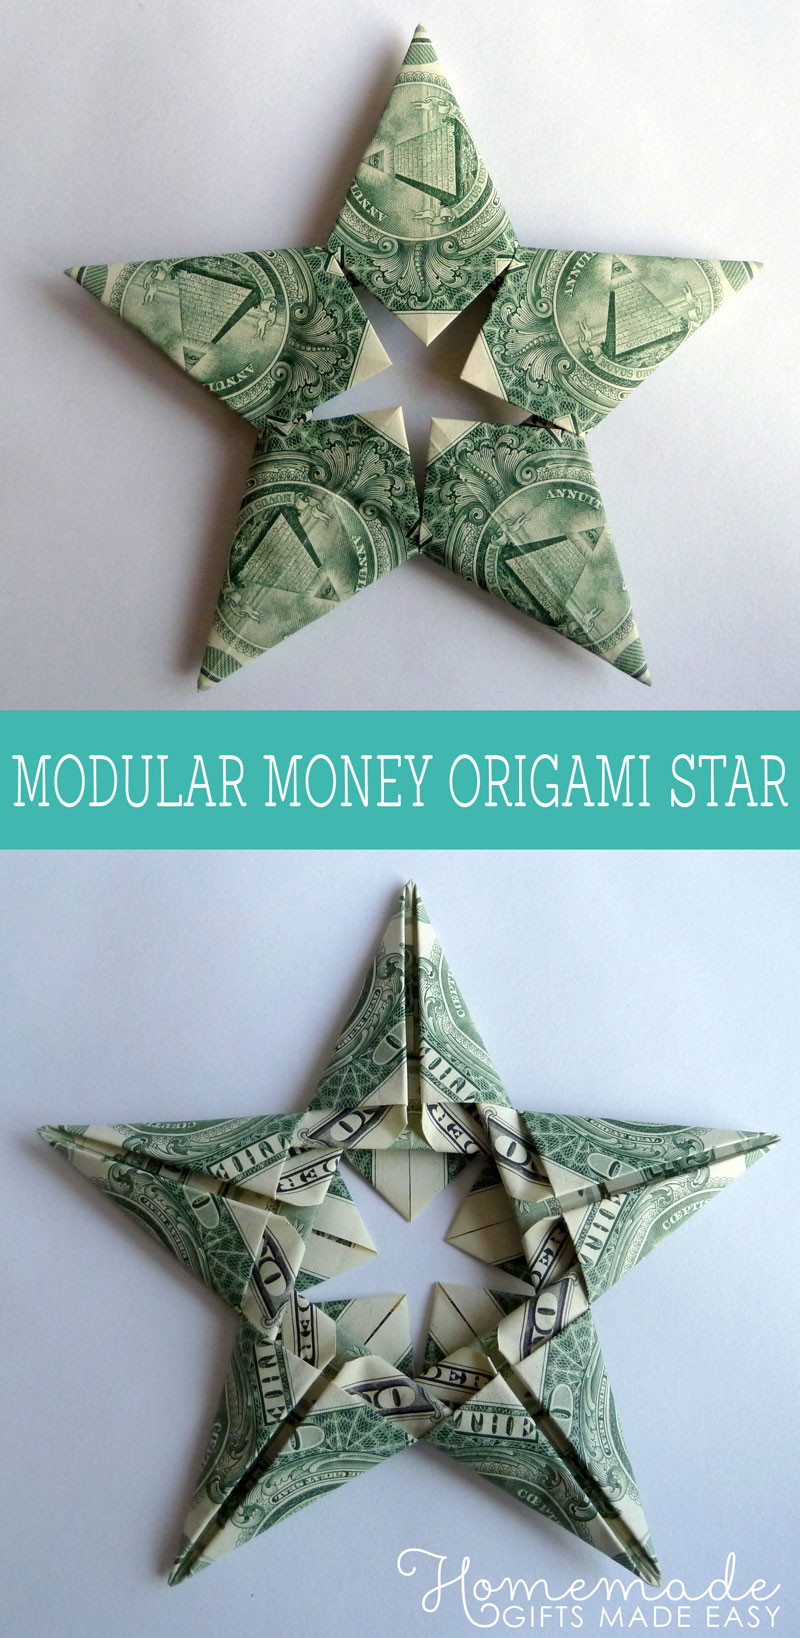 Origami Star How To Make Modular Money Origami Star From 5 Bills How To Fold Step Step